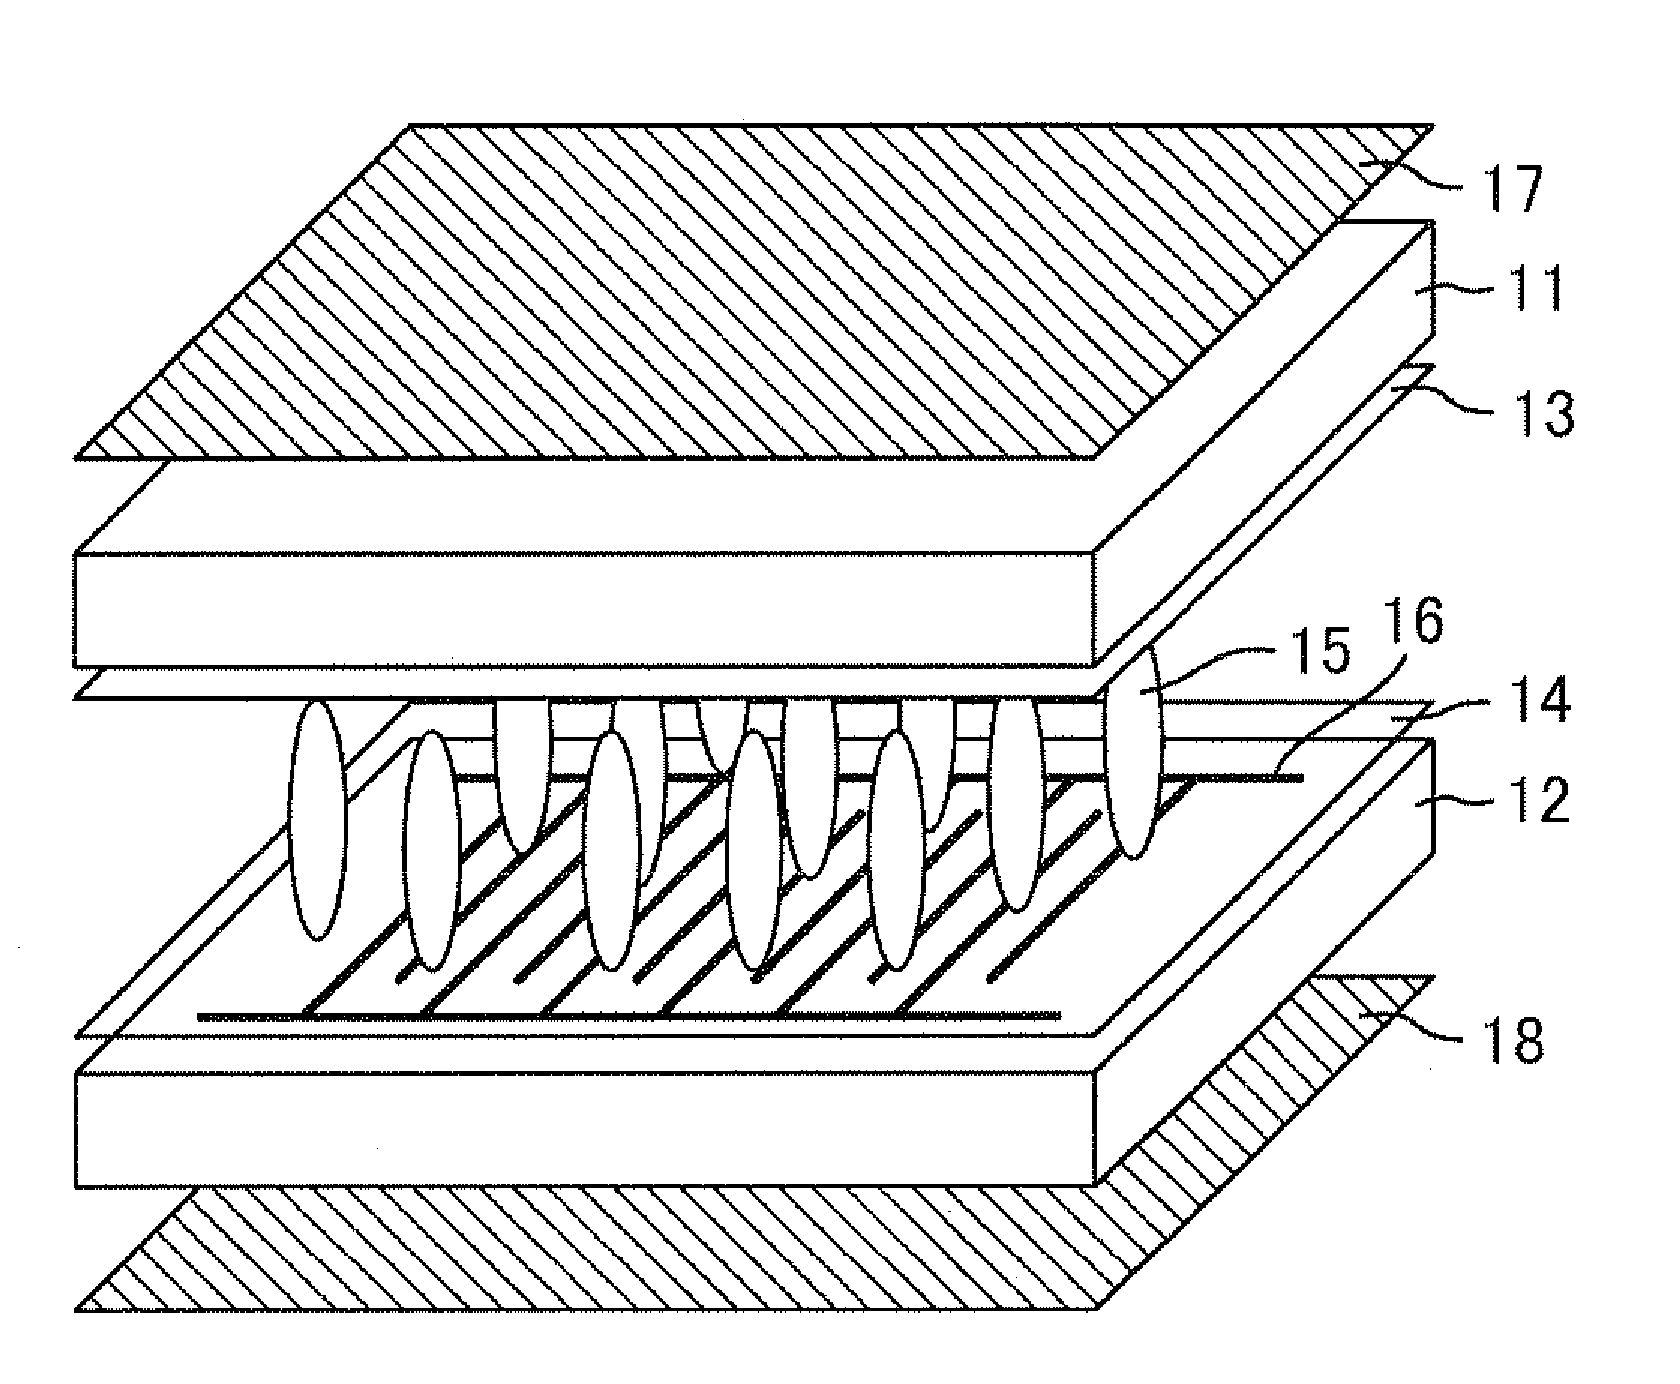 Liquid crystal display device comprising a P-type liquid crystal material and a first alignment layer having an anchoring energy